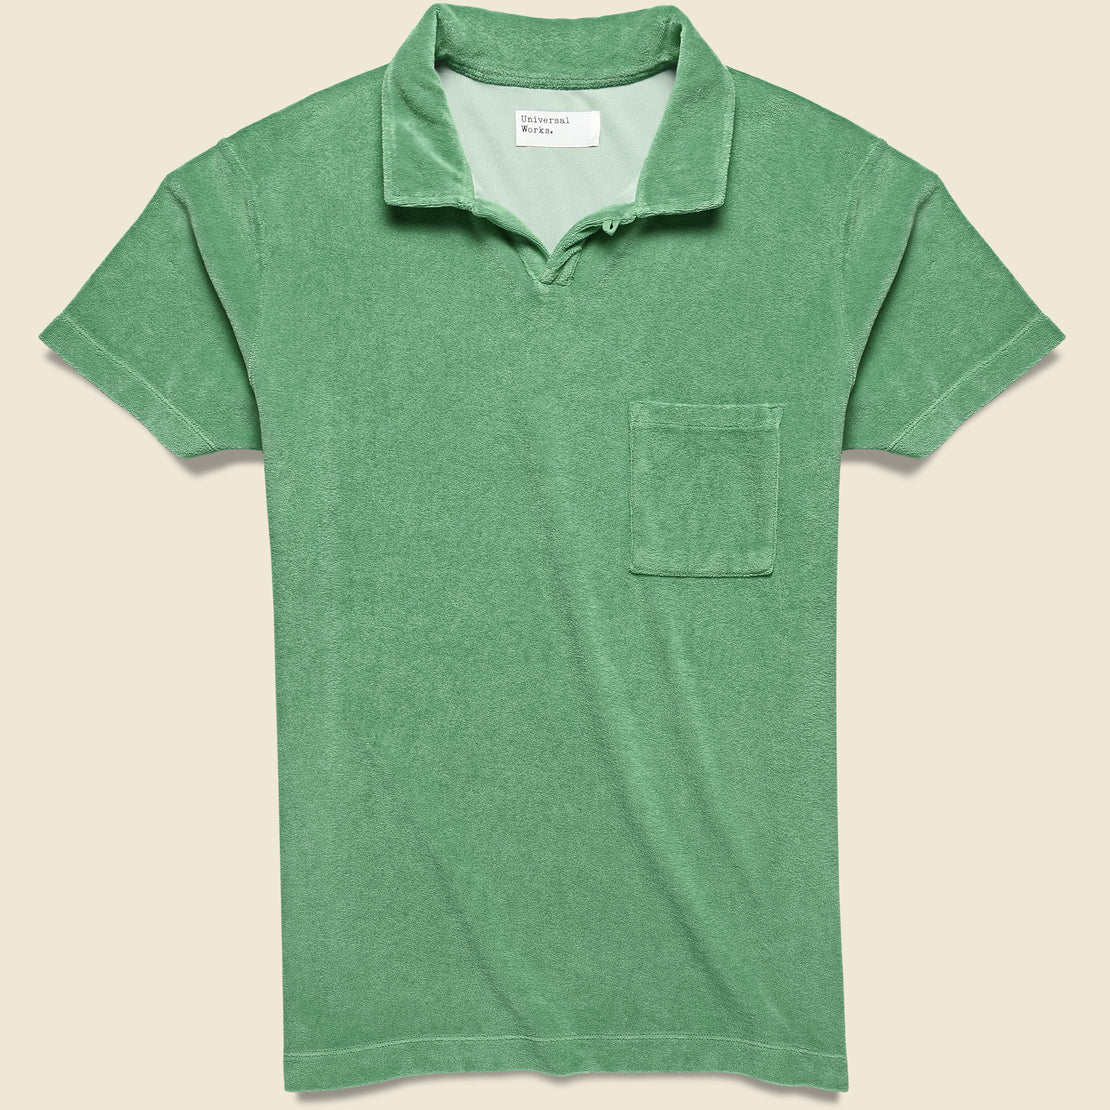 Universal Works Terry Fleece Vacation Polo - Green